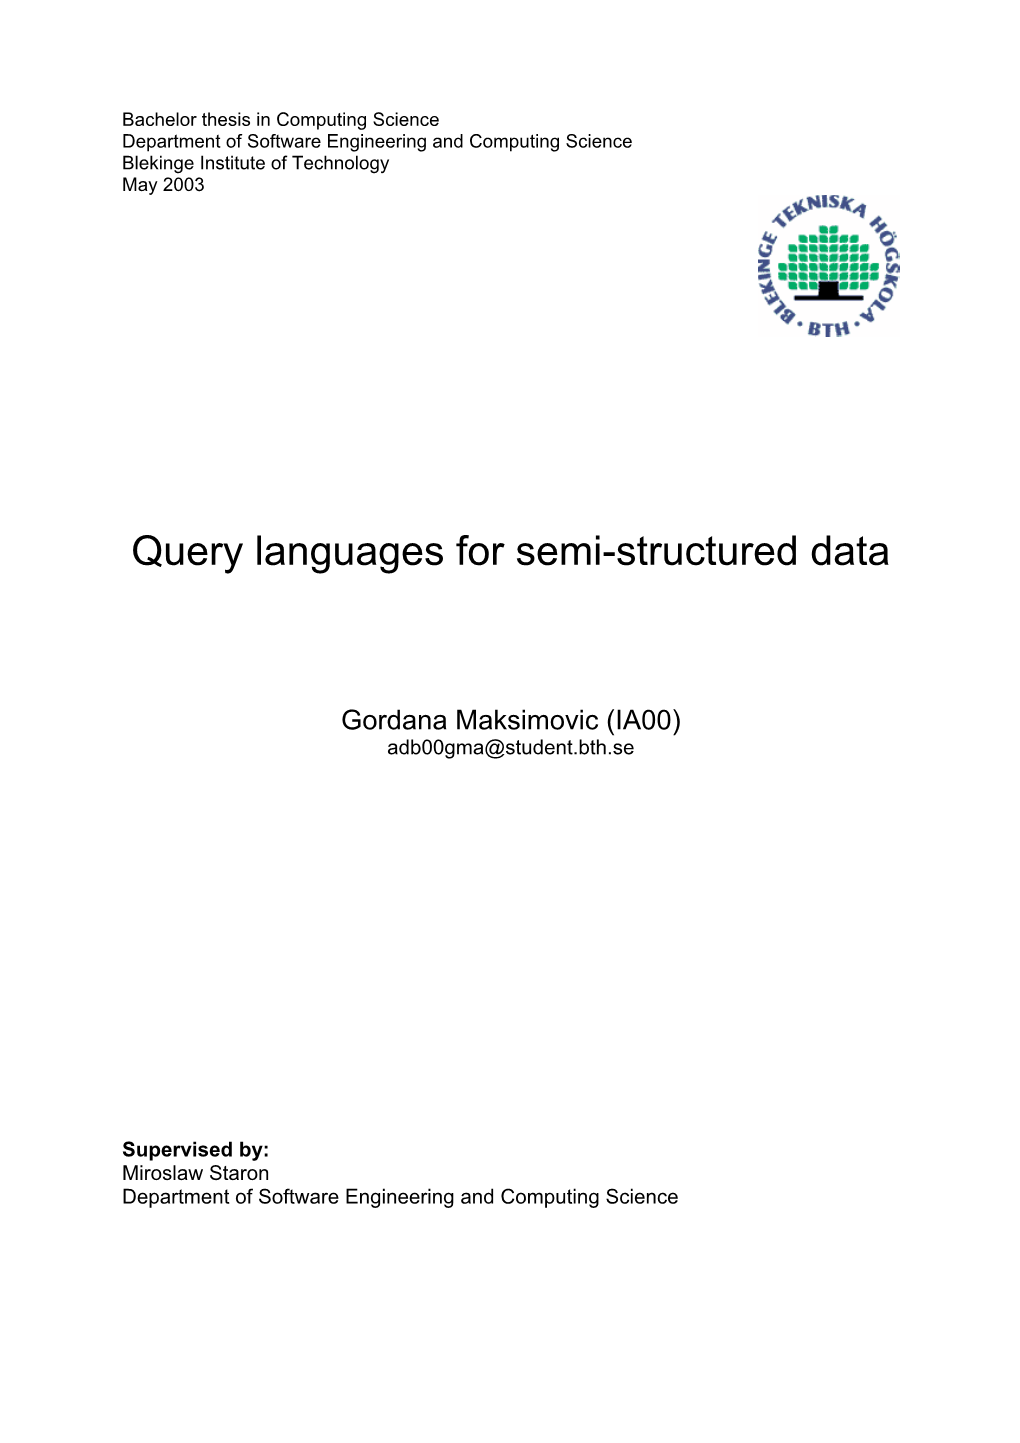 Query Languages for Semi-Structured Data